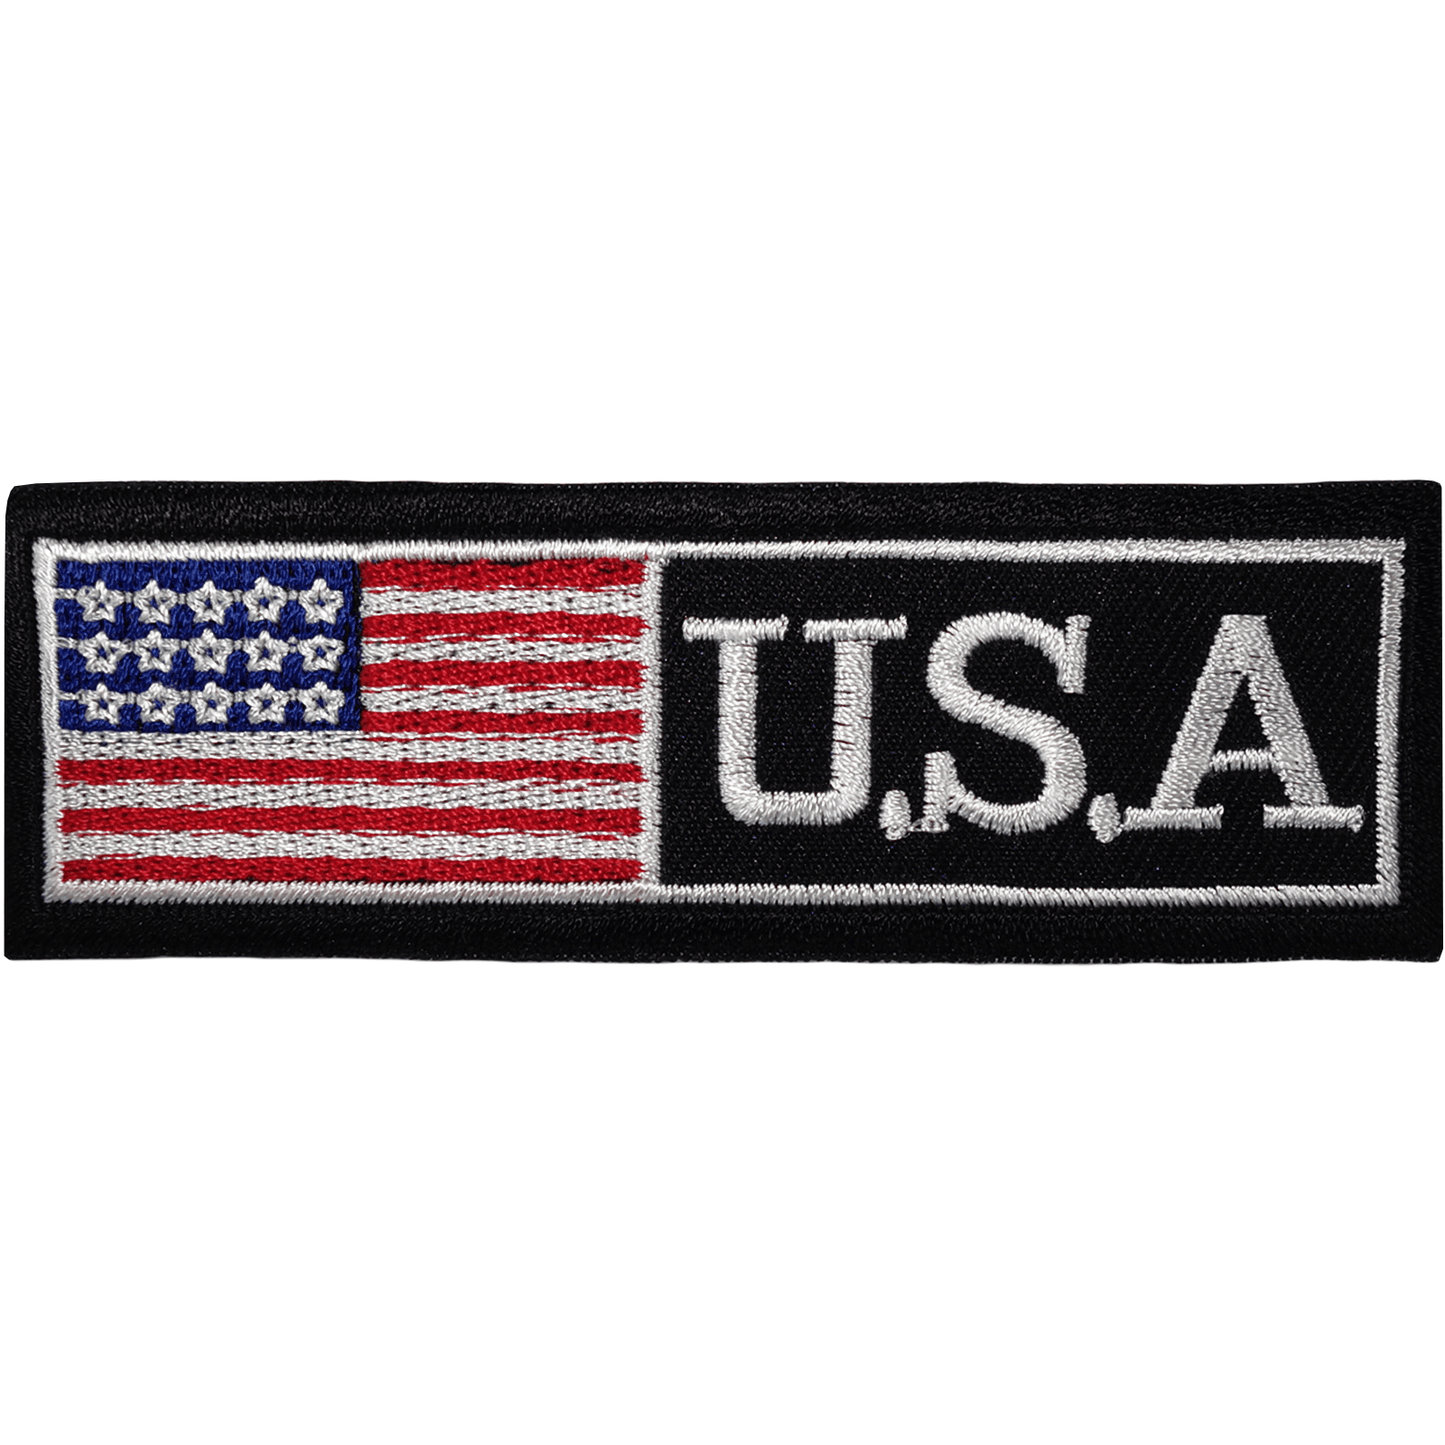 USA Iron On Patch Sew On Cloth United States of America Flag US Applique Badge